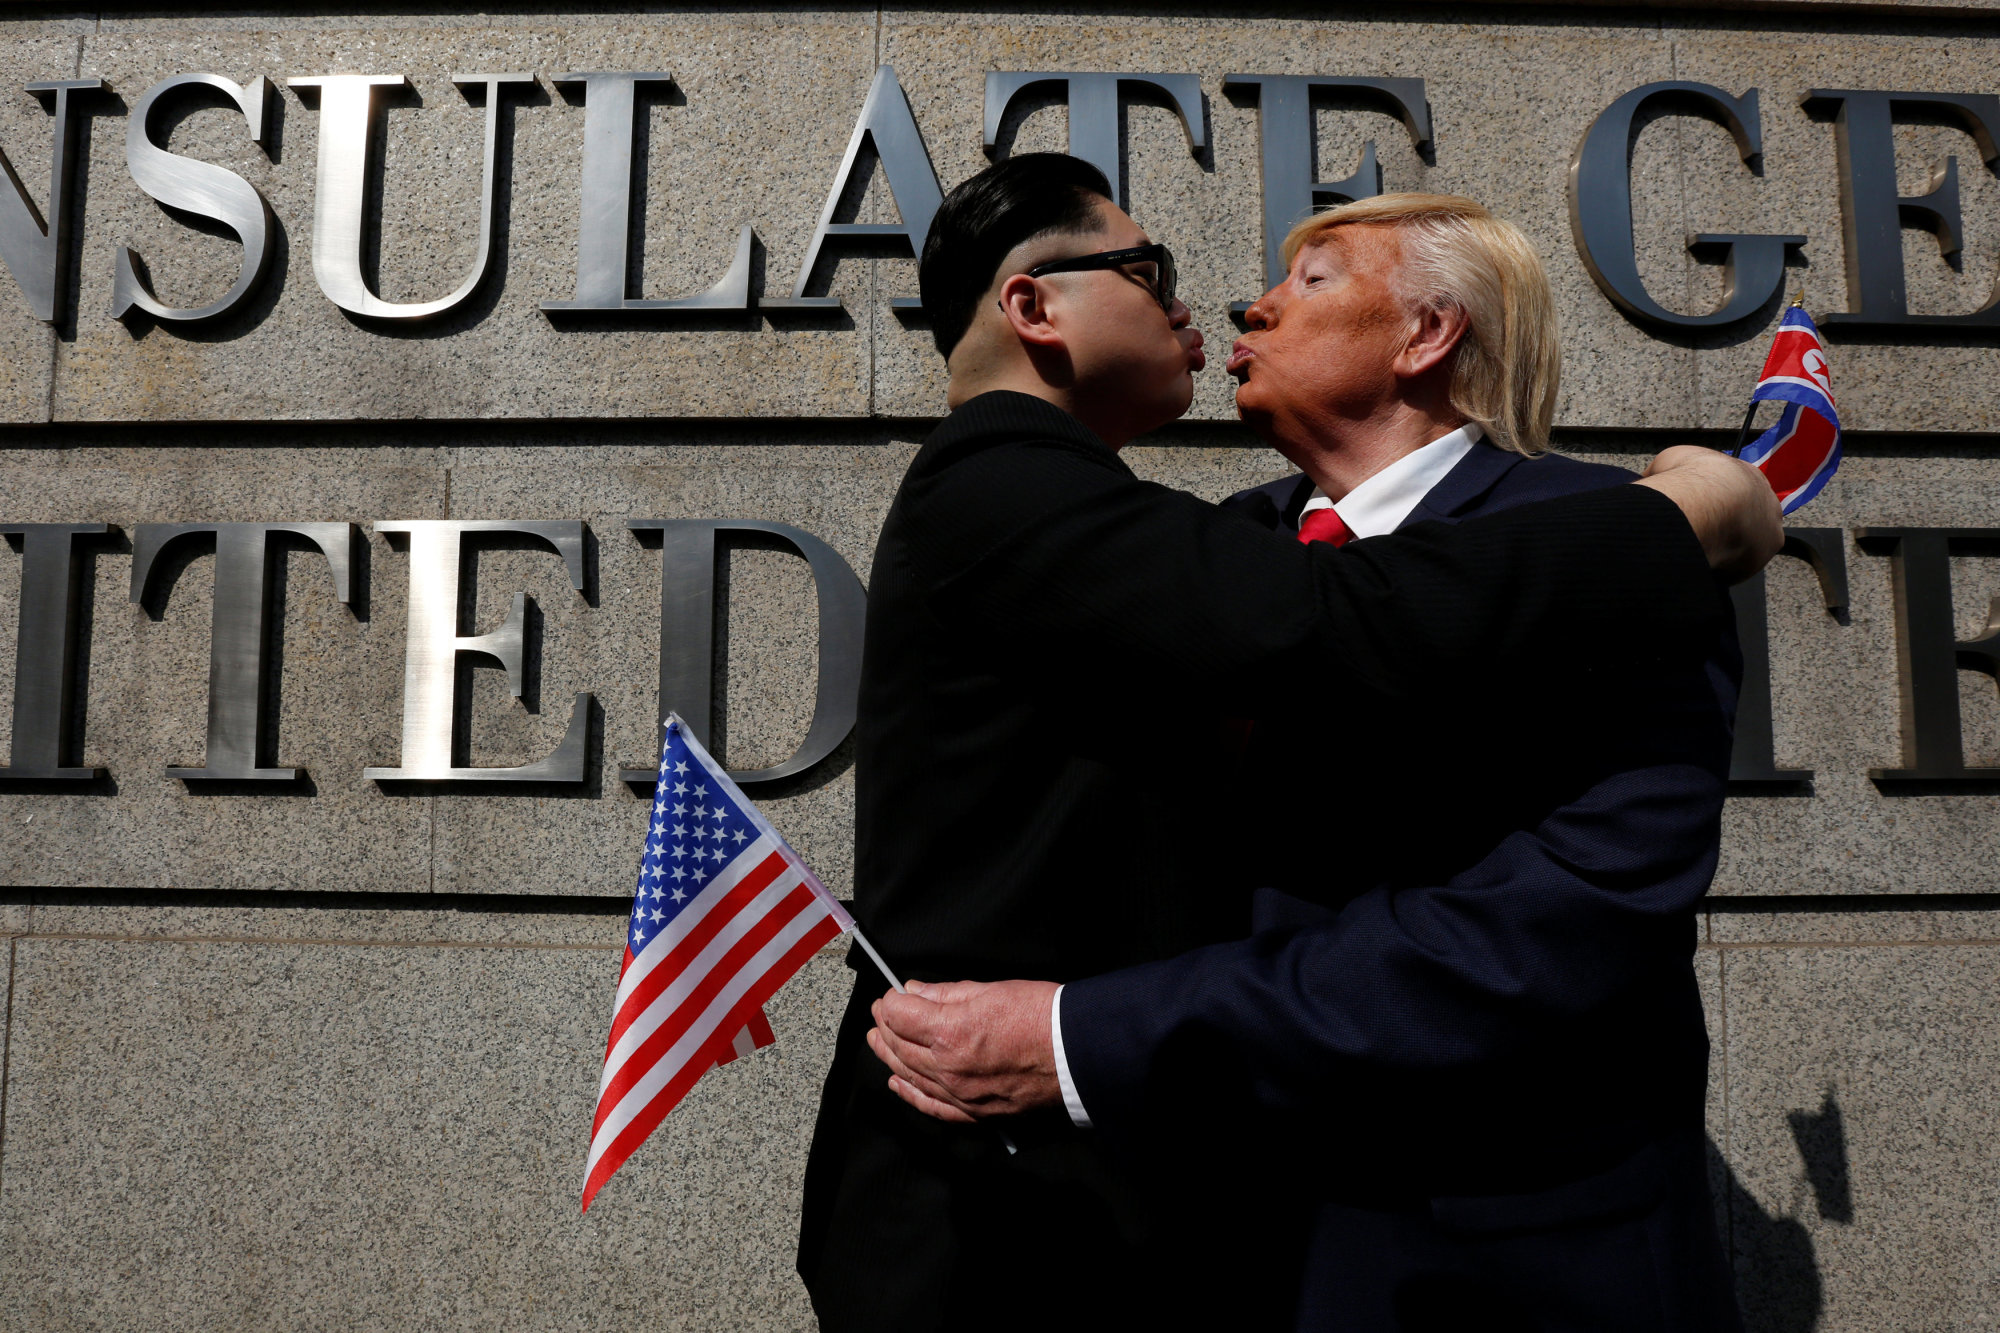 American Dennis Alan impersonates U.S. President Donald Trump with 'Howard,' an Australian-Chinese man who gave his first name while impersonating North Korean leader Kim Jong Un outside the U.S. Consulate in Hong Kong on Wednesday. | REUTERS